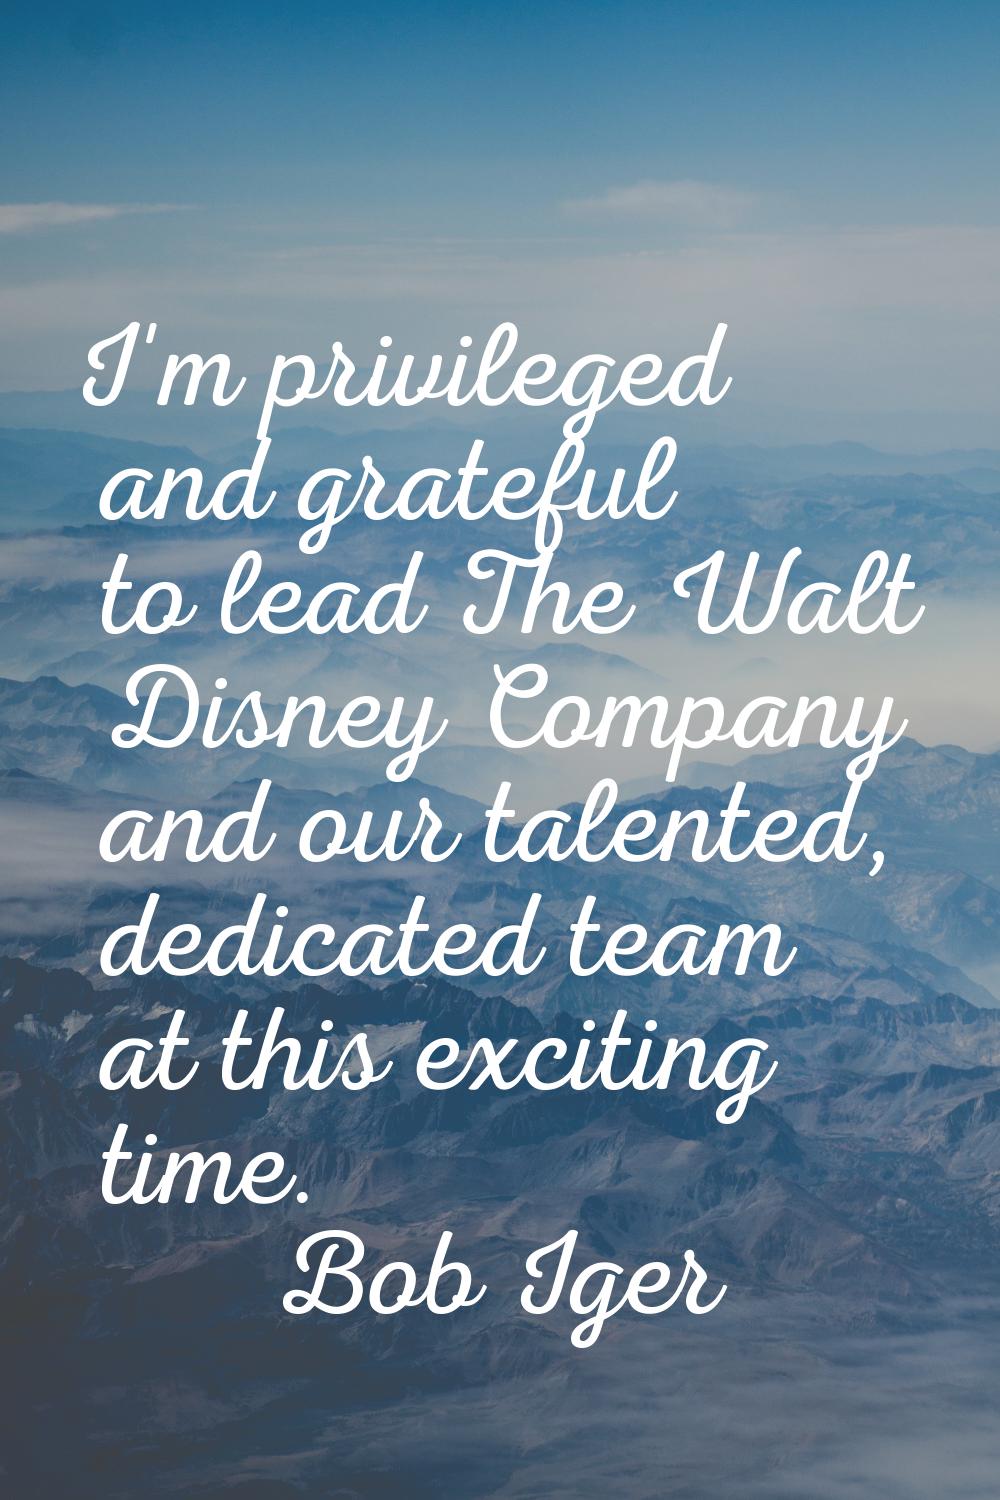 I'm privileged and grateful to lead The Walt Disney Company and our talented, dedicated team at thi